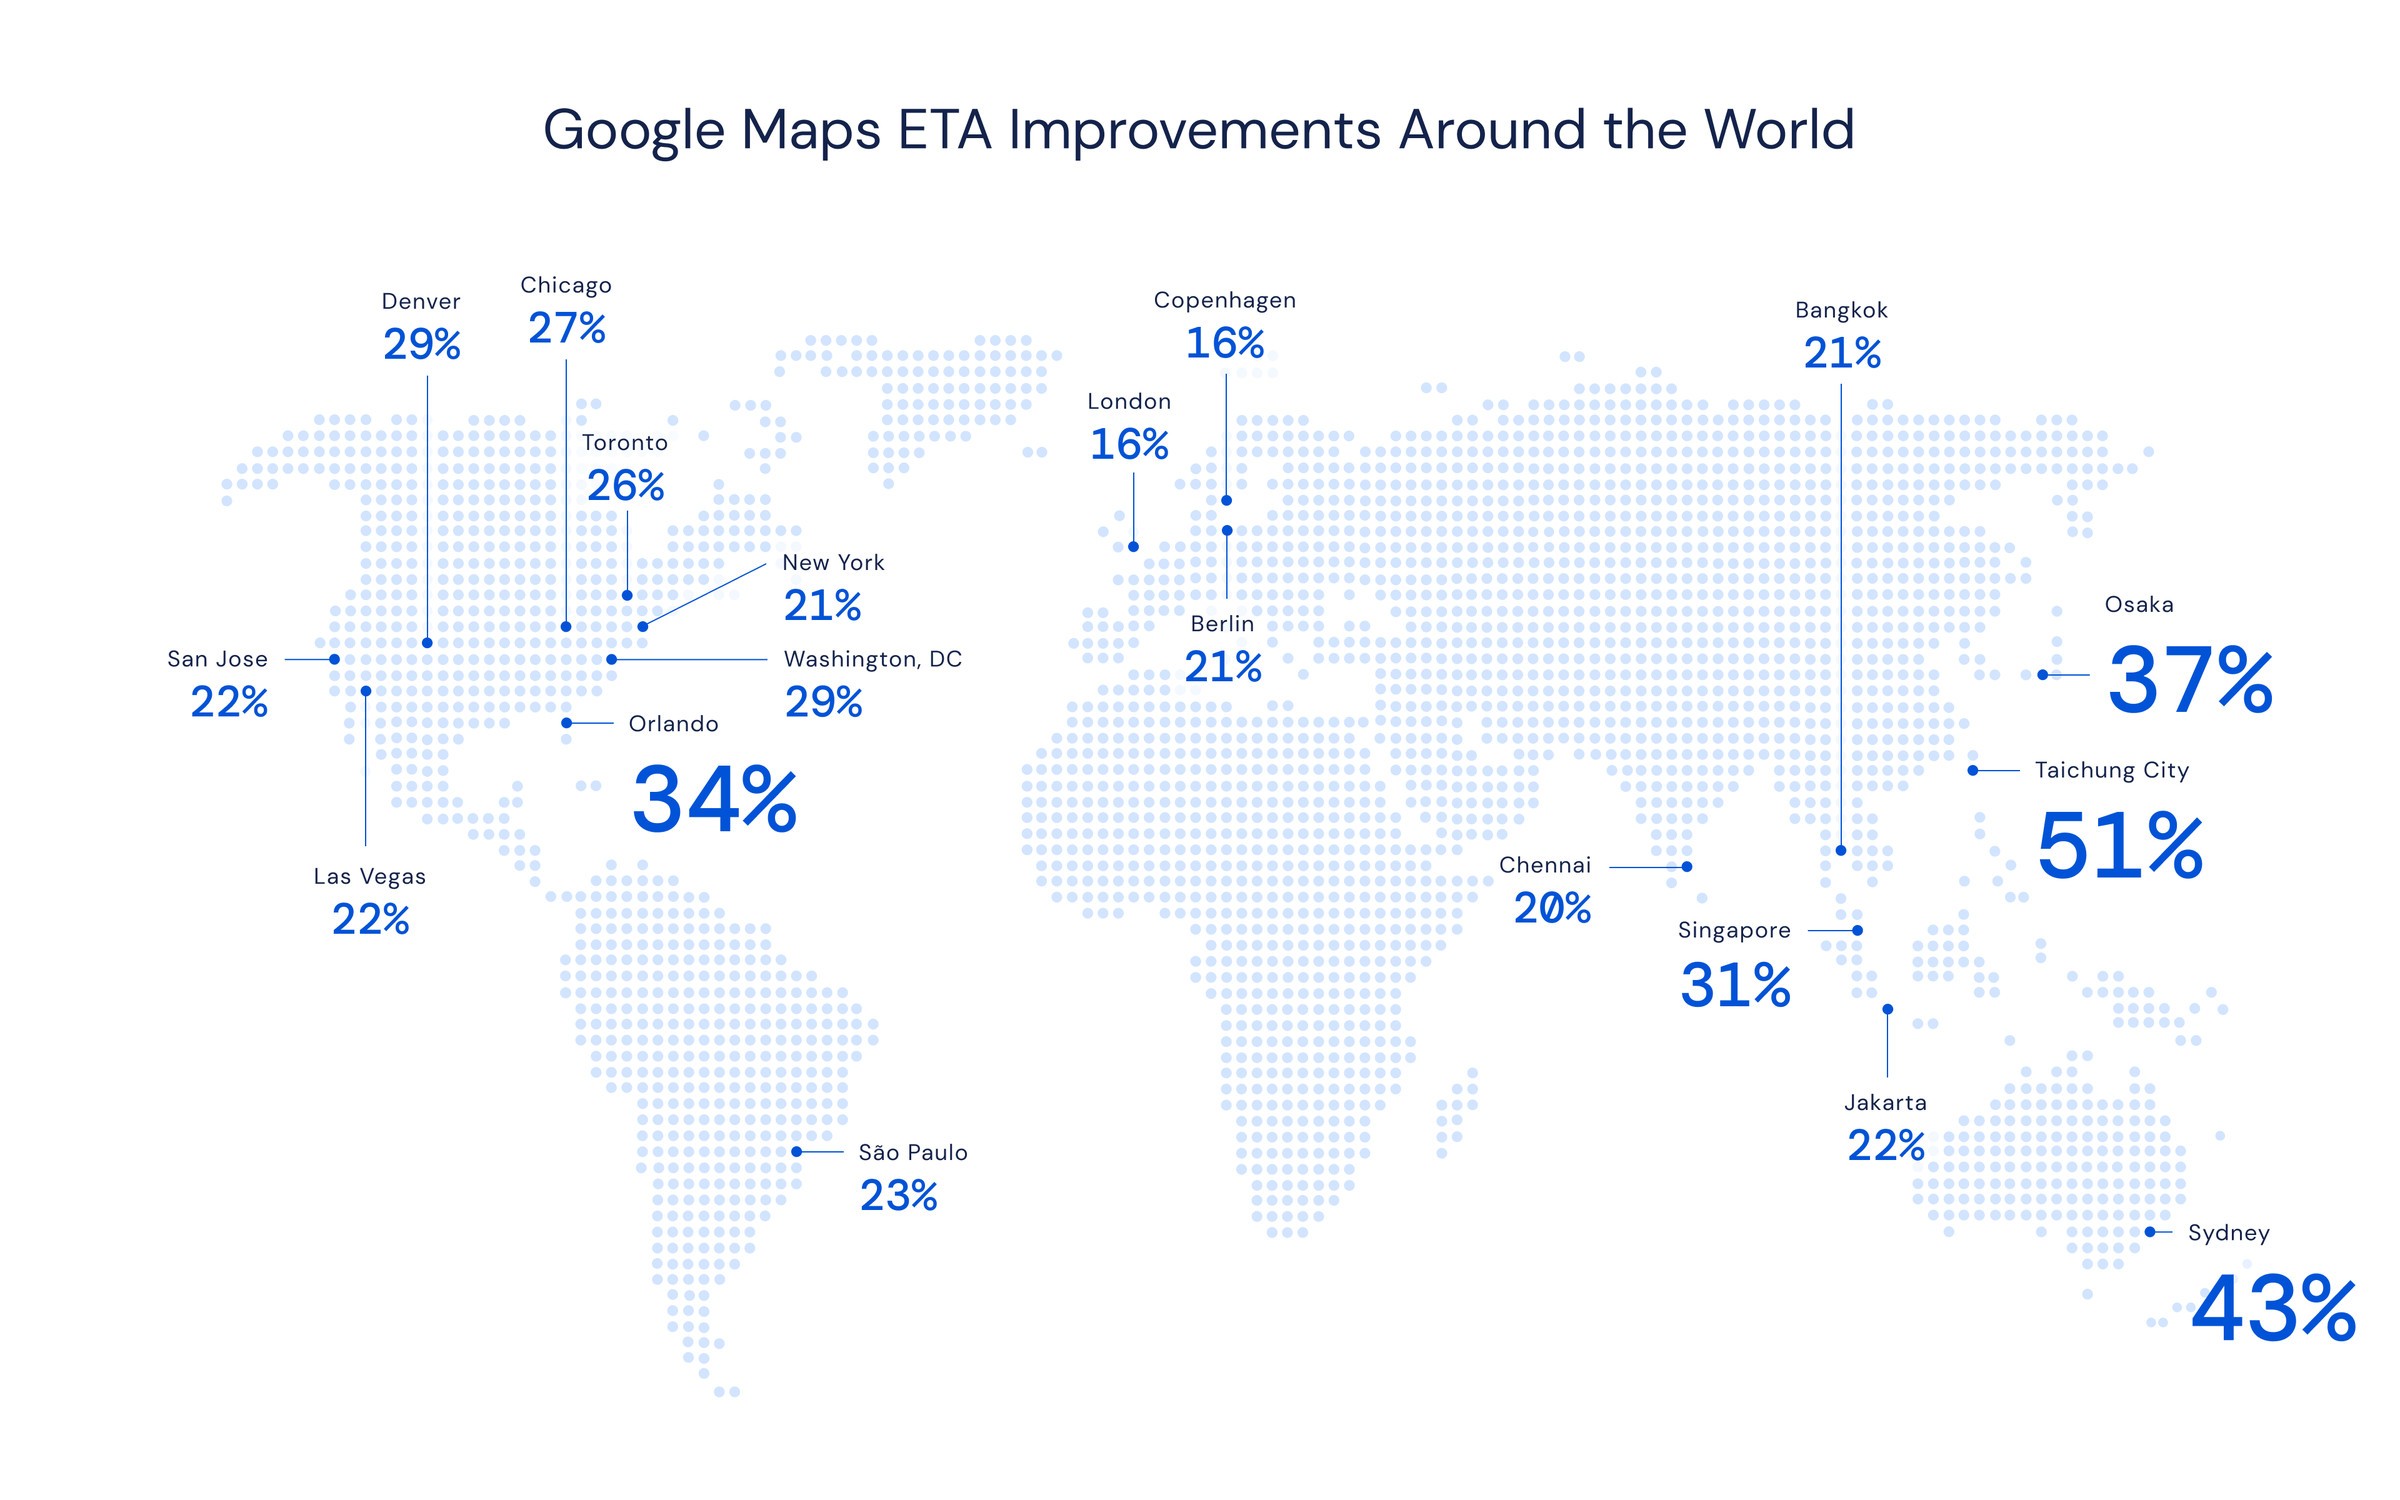 Google says using DeepMind’s AI tools have improved the accuracy of ETAs in Maps by up to 50 percent. 